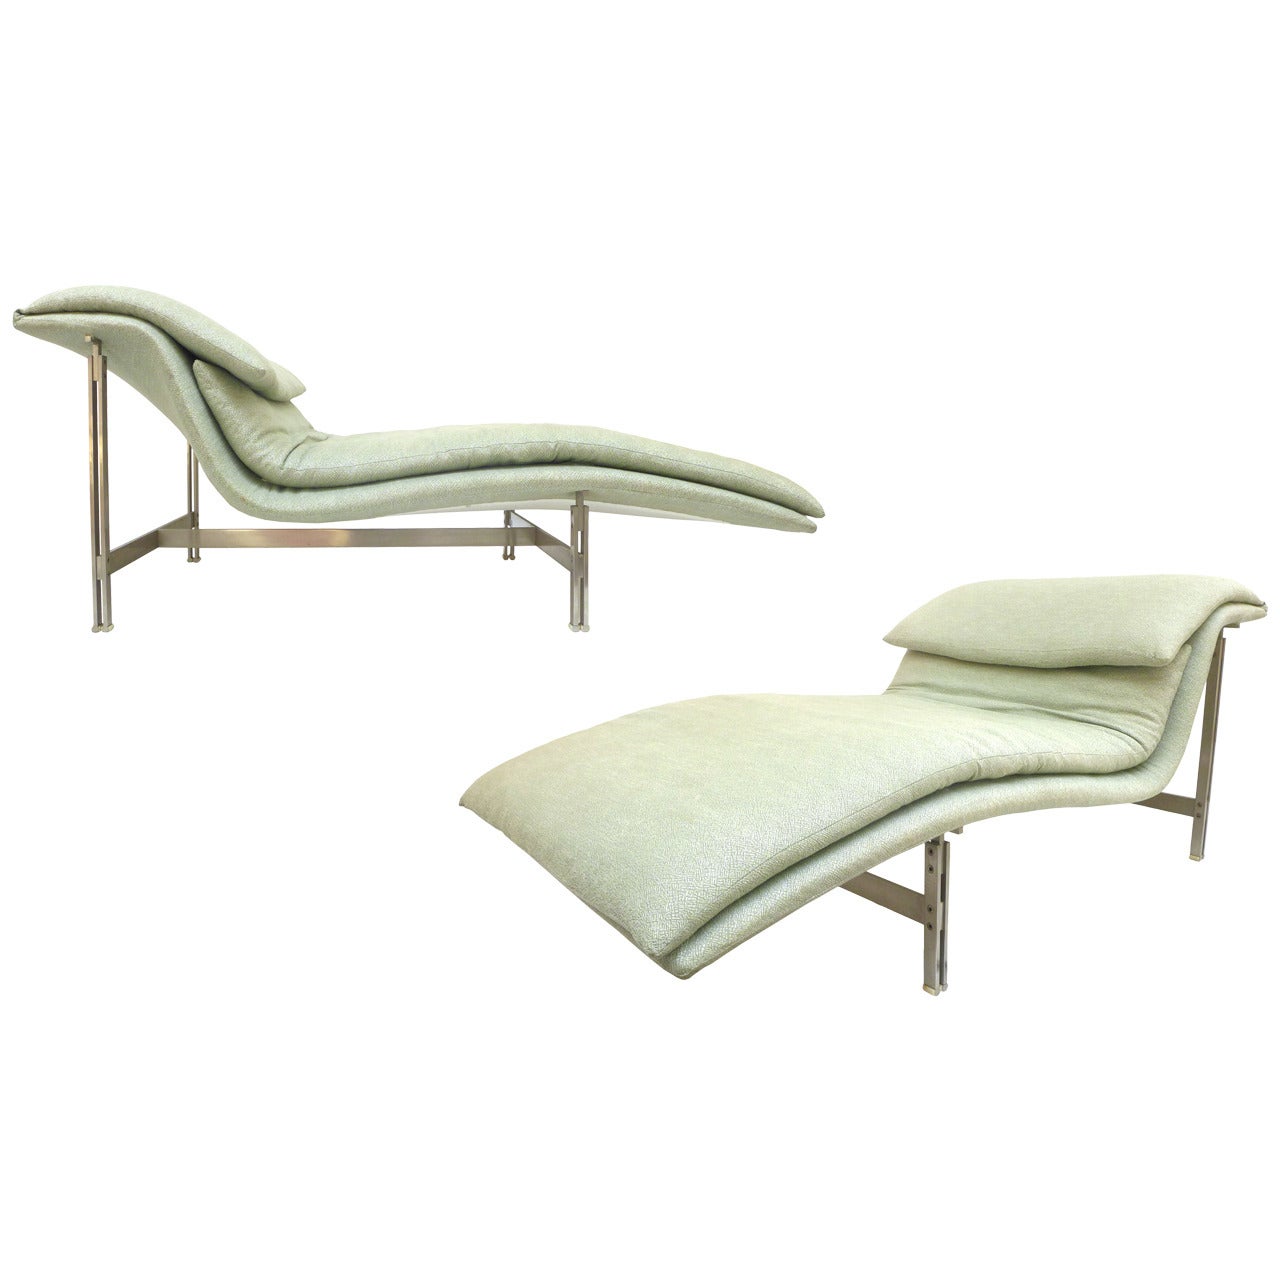 Pair of "Wave" Chaise Lounge Chairs by Giovanni Offredi for Saporiti